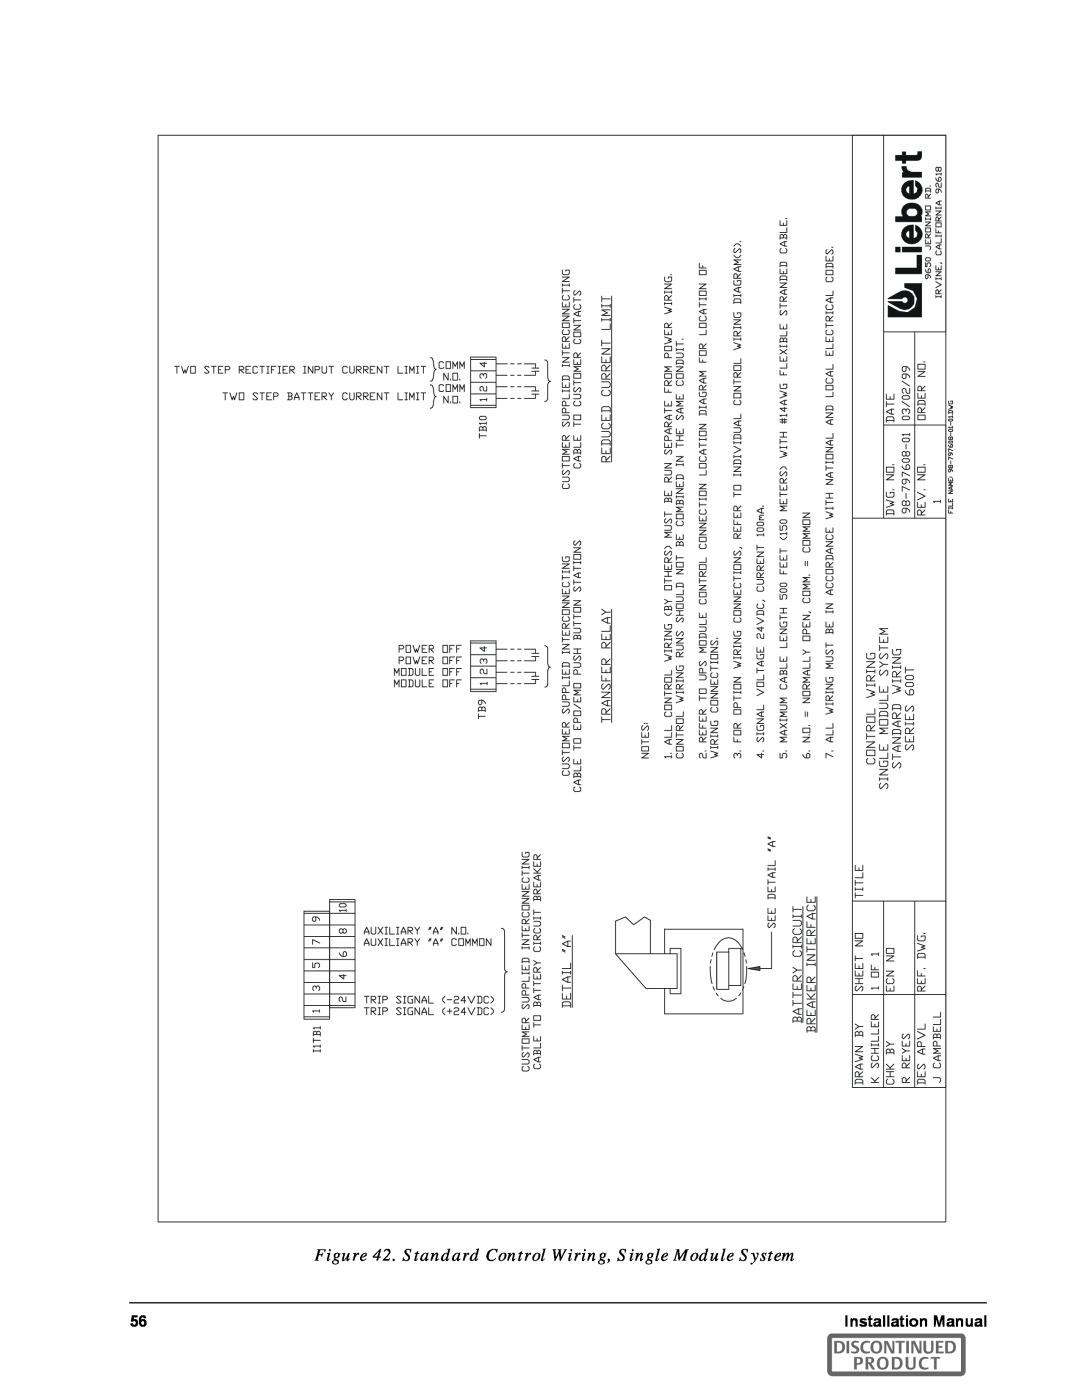 Emerson SERIES 600T manual Standard Control Wiring, Single Module System, Discontinued Product 